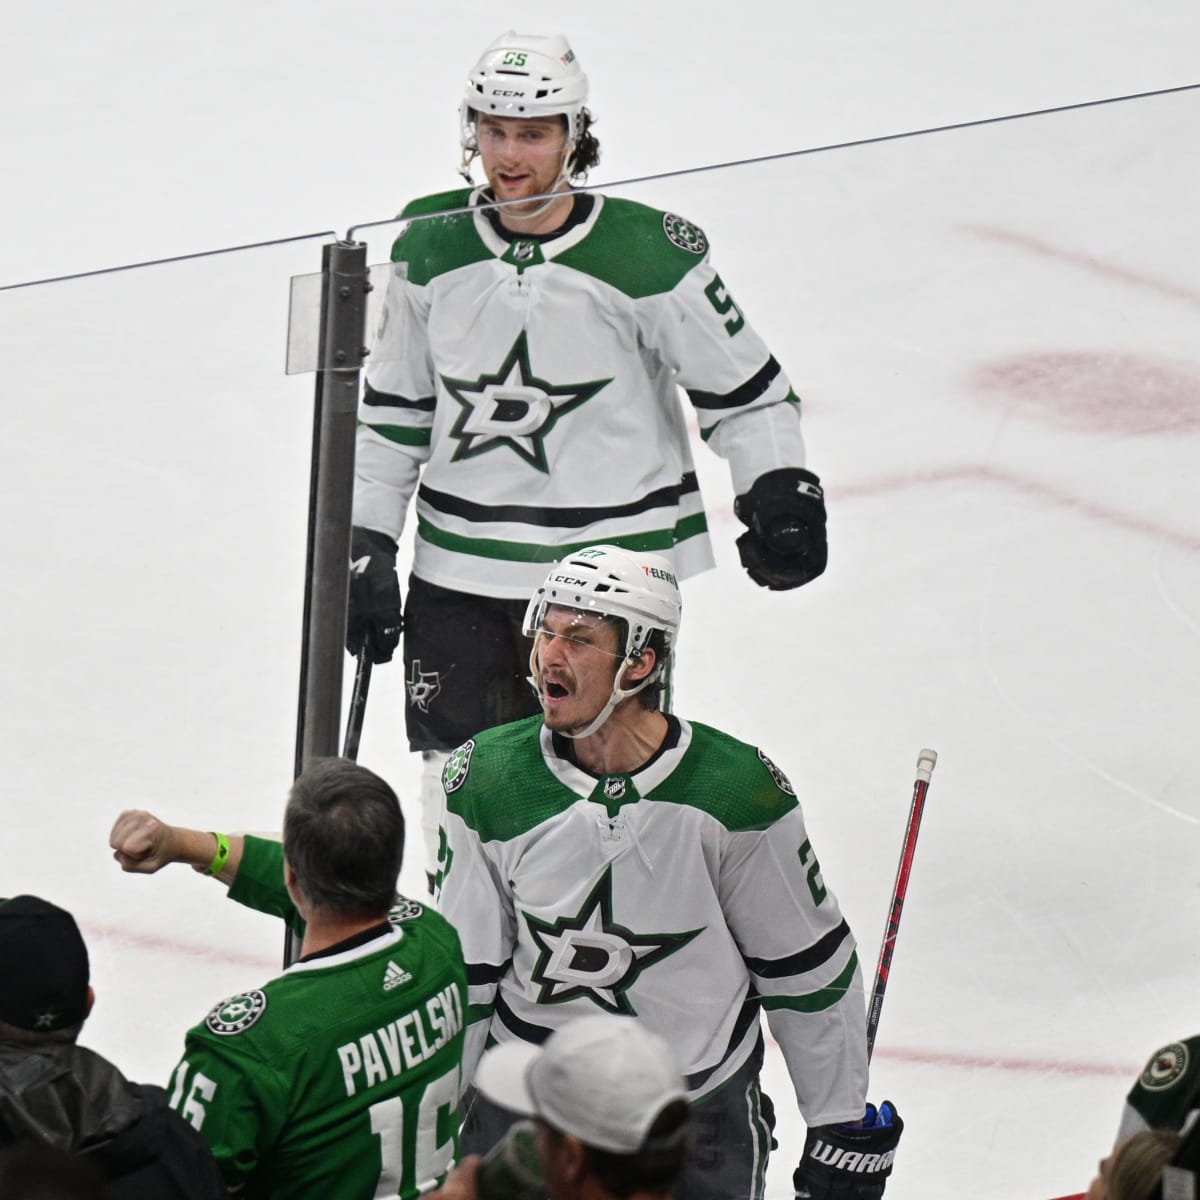 Hintz hat trick as Stars get even with 7-3 win over Wild